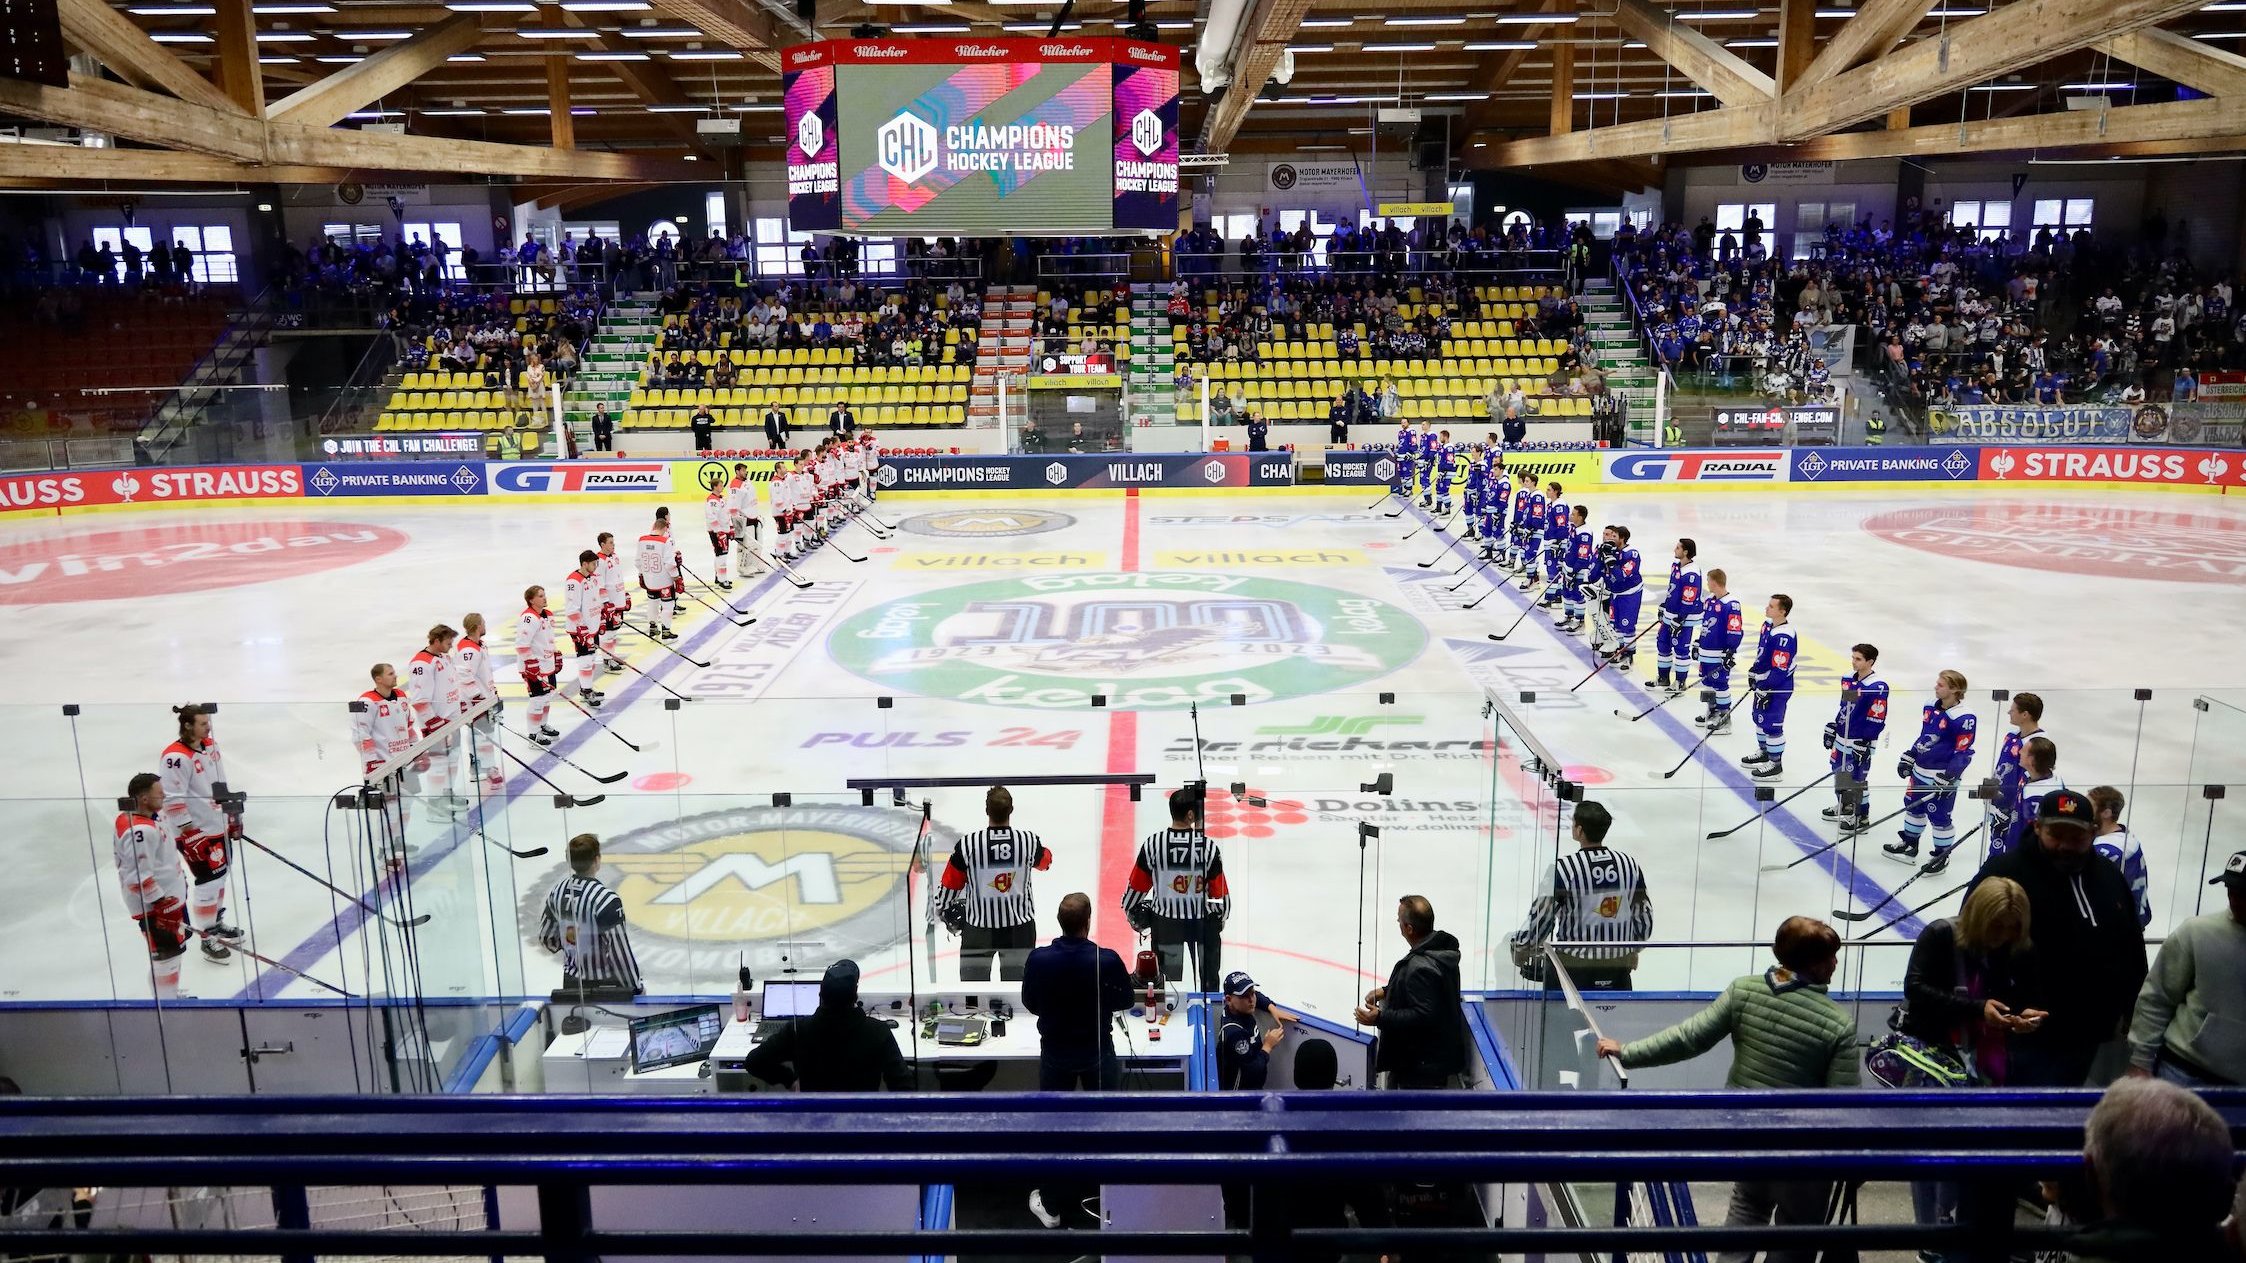 Two ice hockey teams are facing each other on the ice